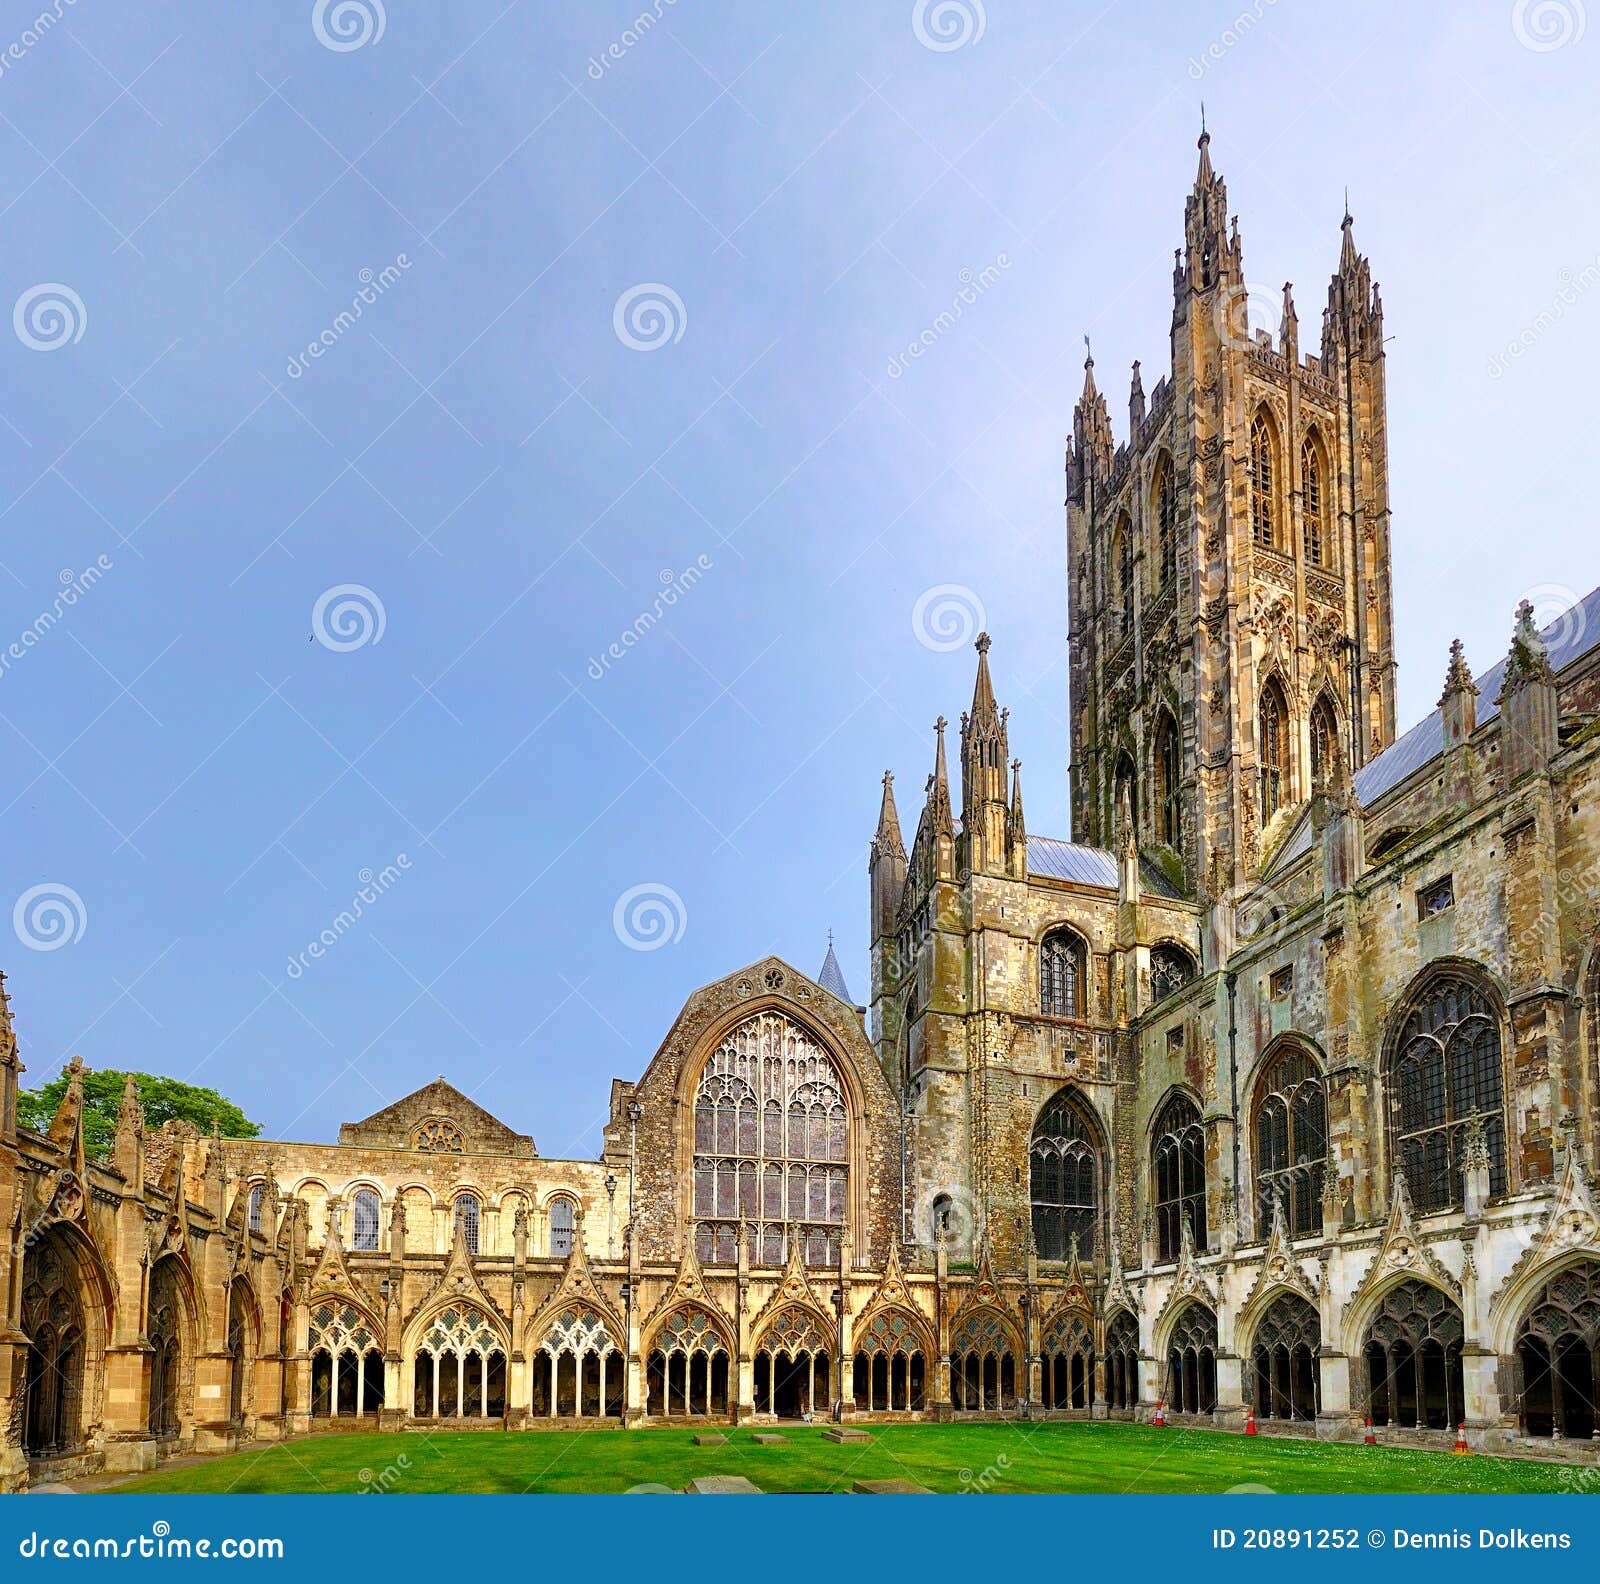 courtyard of canterbury cathedral